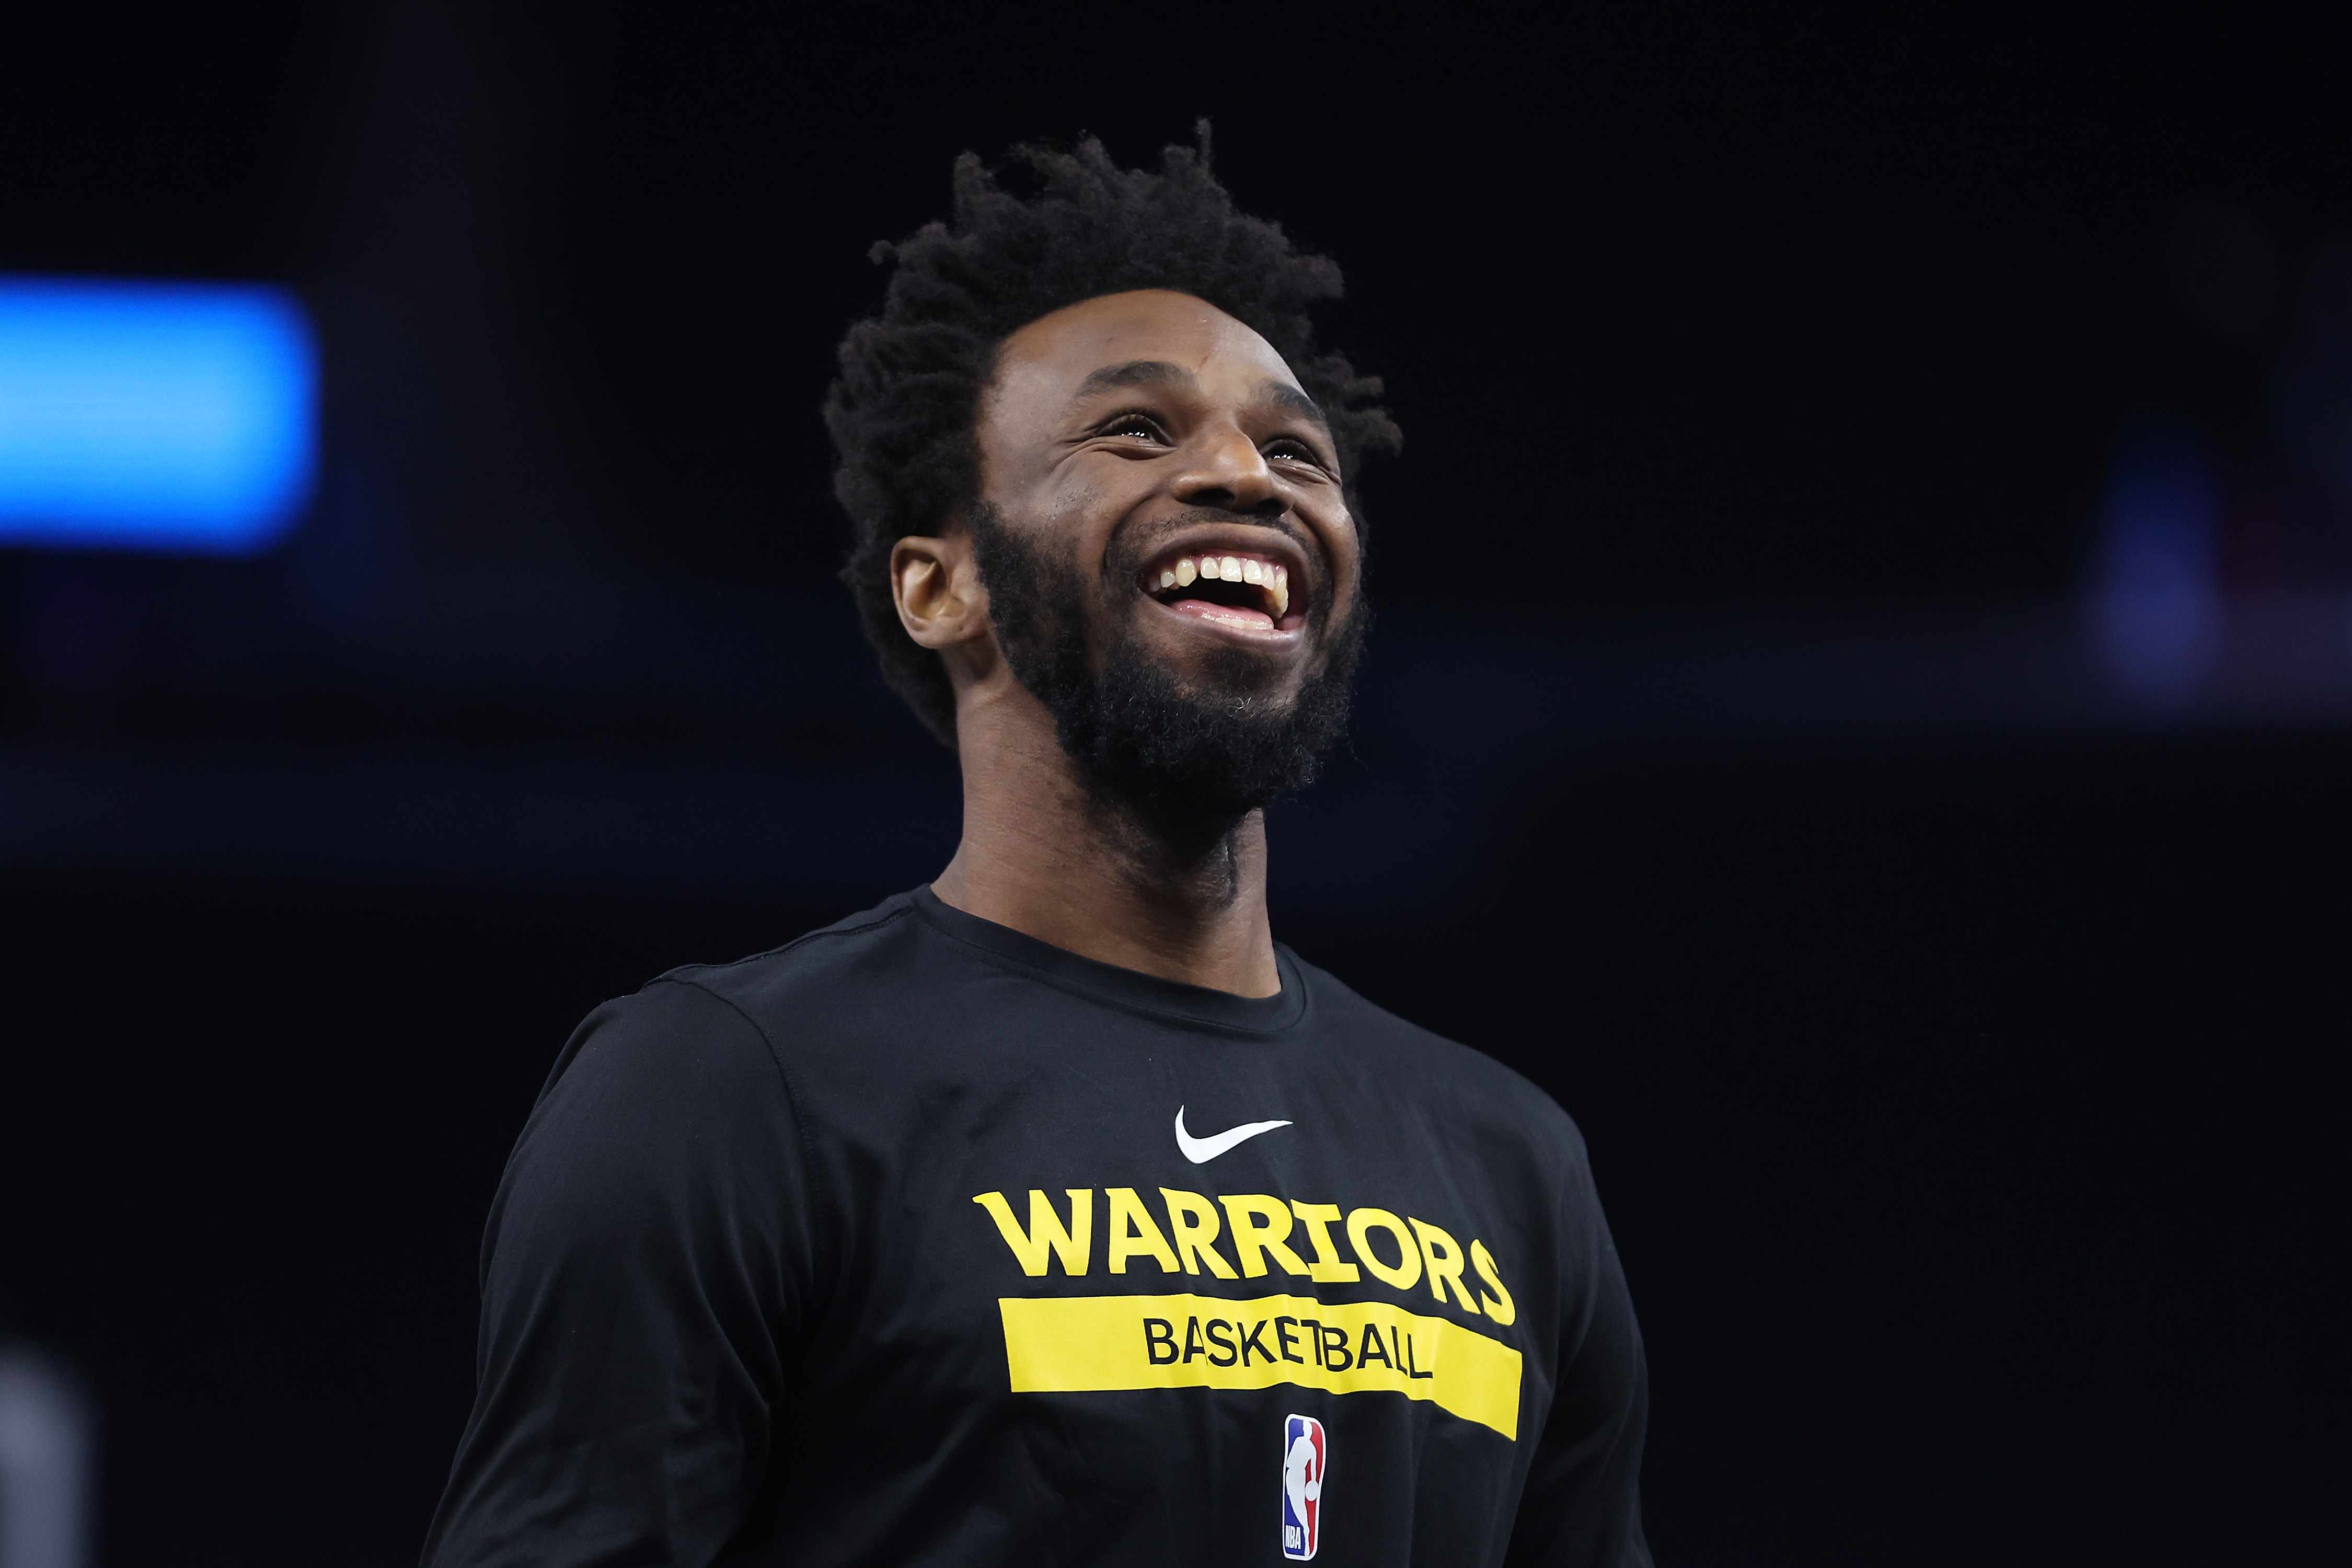 Andrew Wiggins smiling in warm-ups